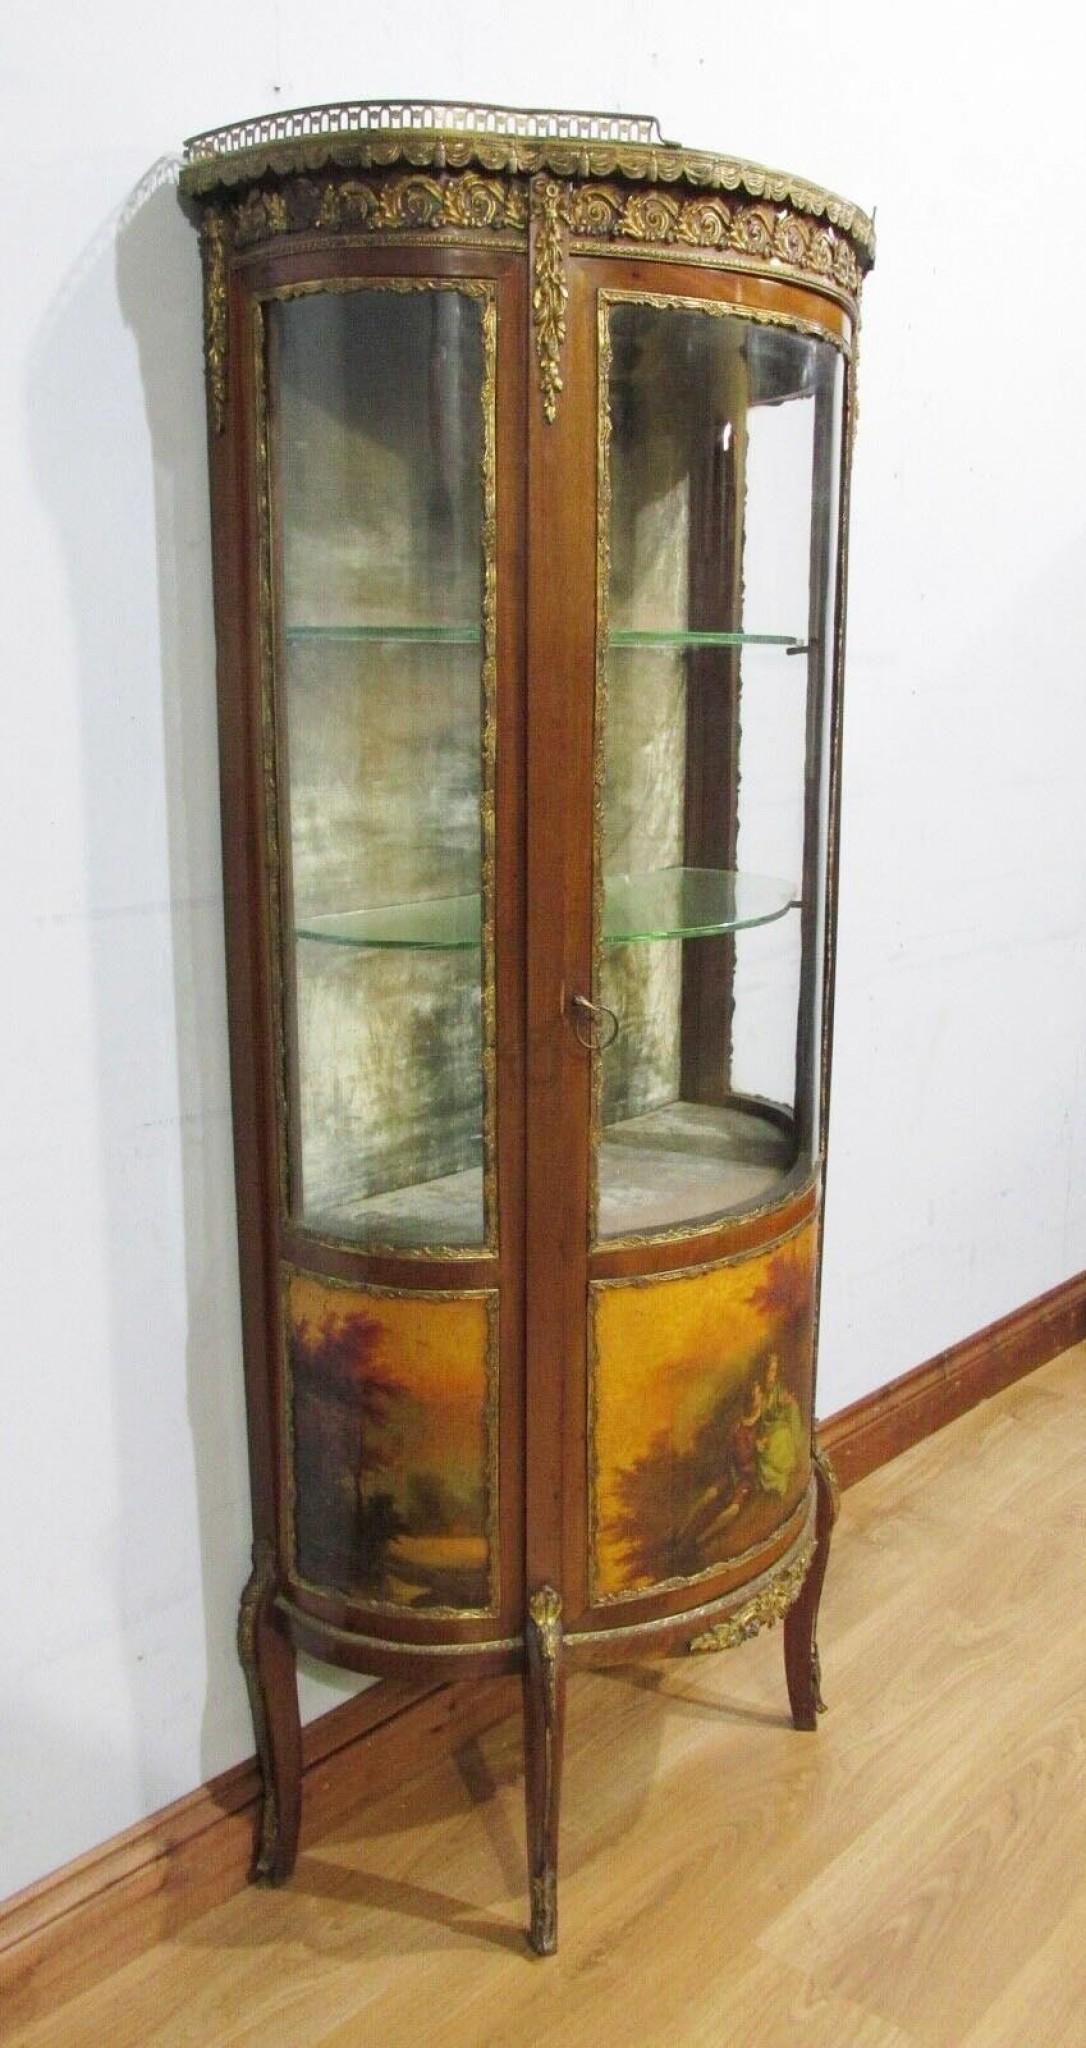 Late 19th Century French Antique Vitrine Painted Vernis Martin Display Cabinet 1880 For Sale